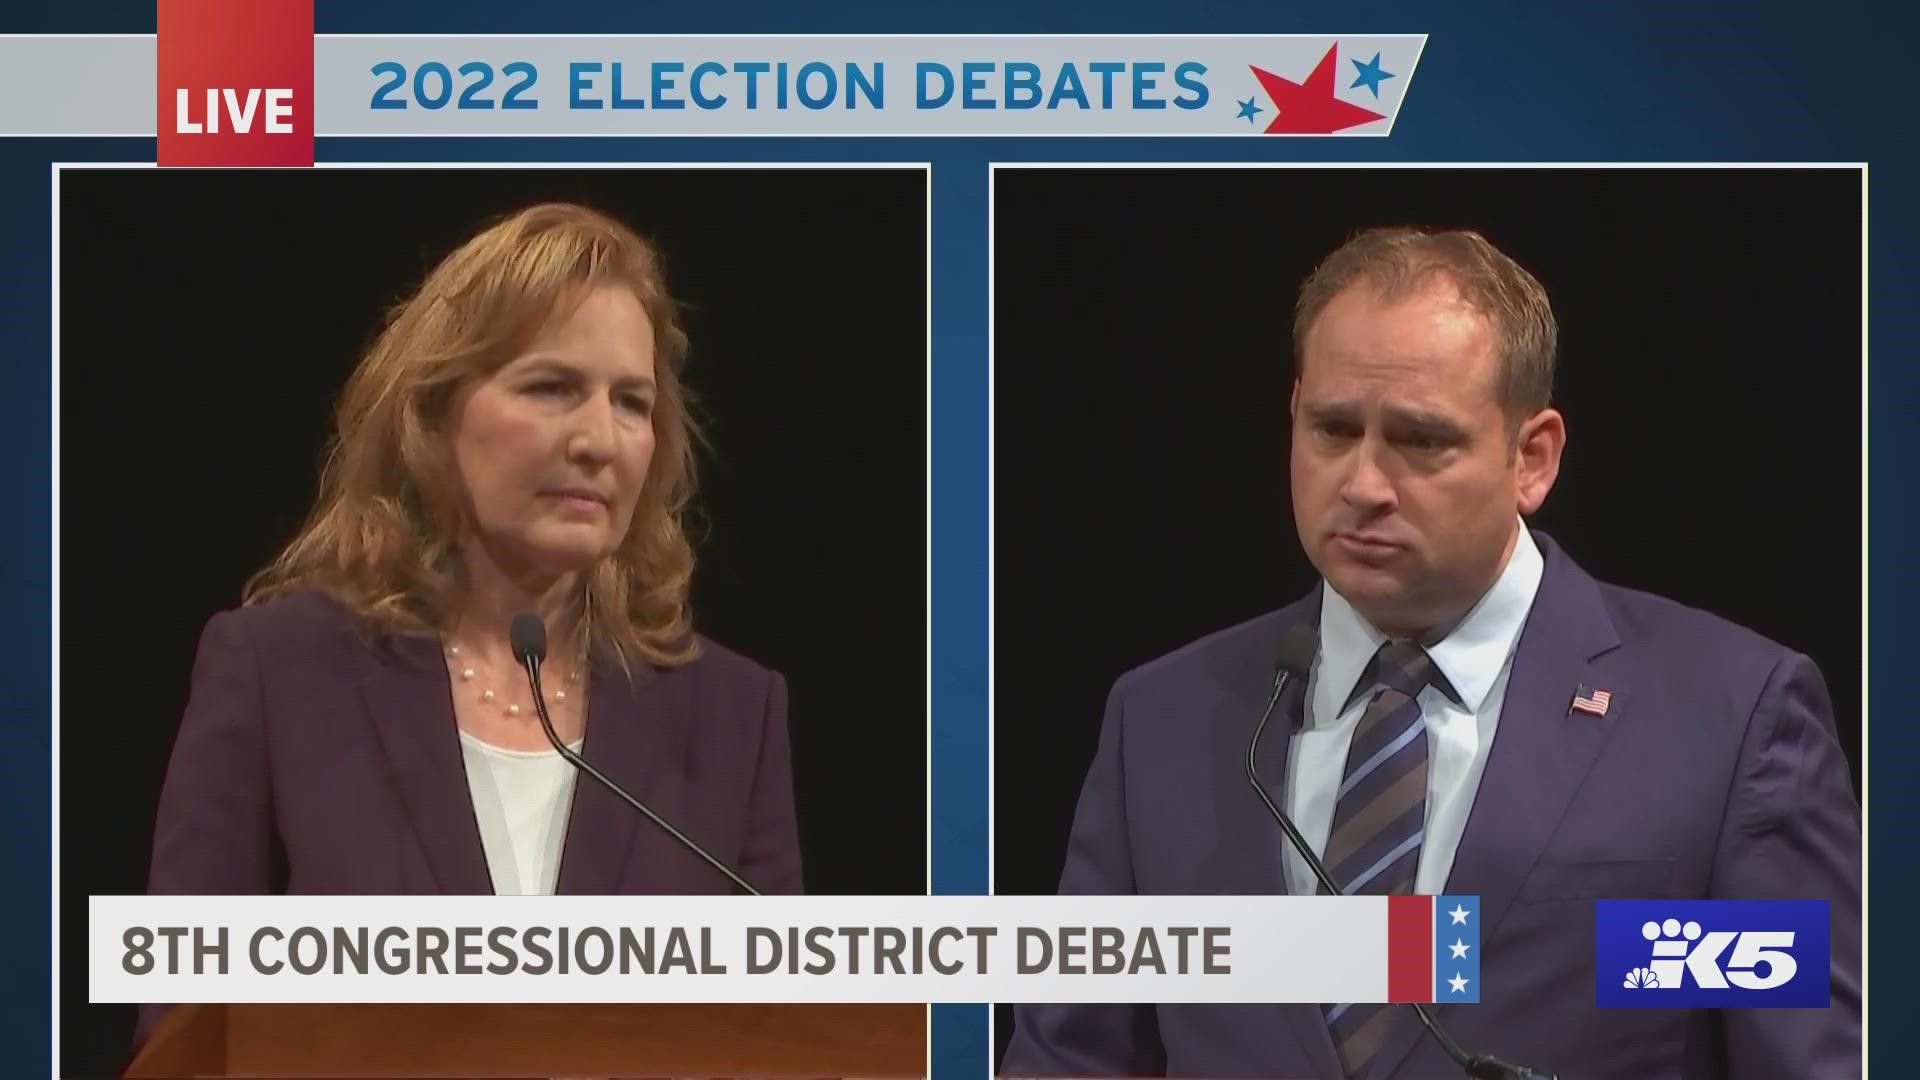 The 8th Congressional District candidates debated Oct. 28, 2022, ahead of the 2022 Washington state general election.